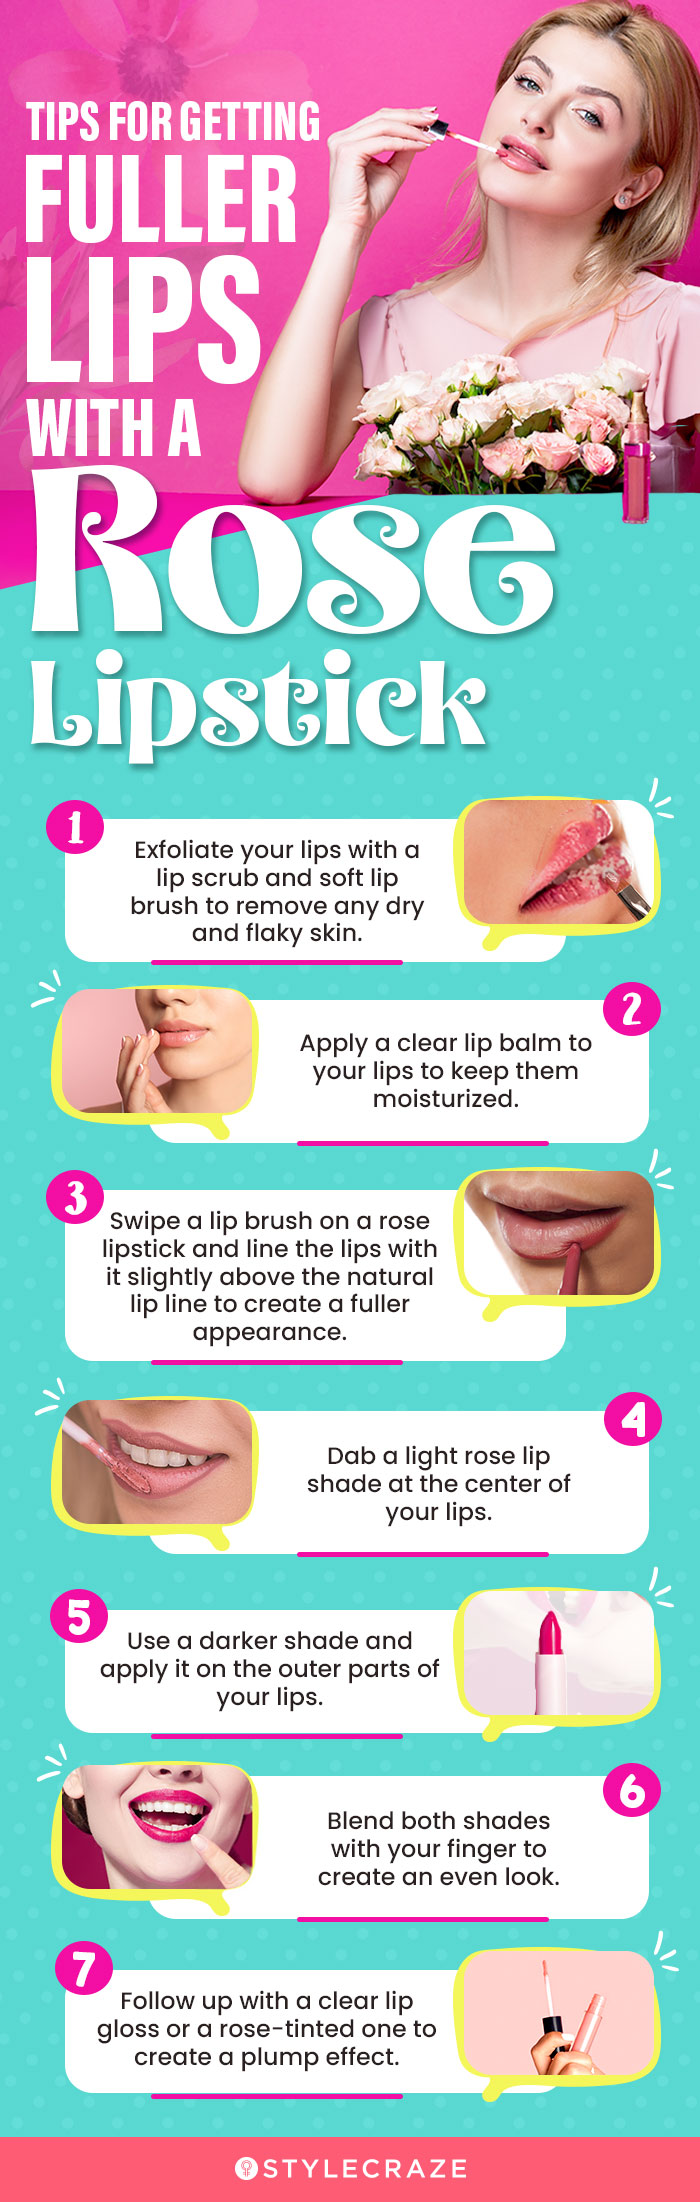 Tips For Getting Fuller Lips With Rose Lipsticks (infographic)